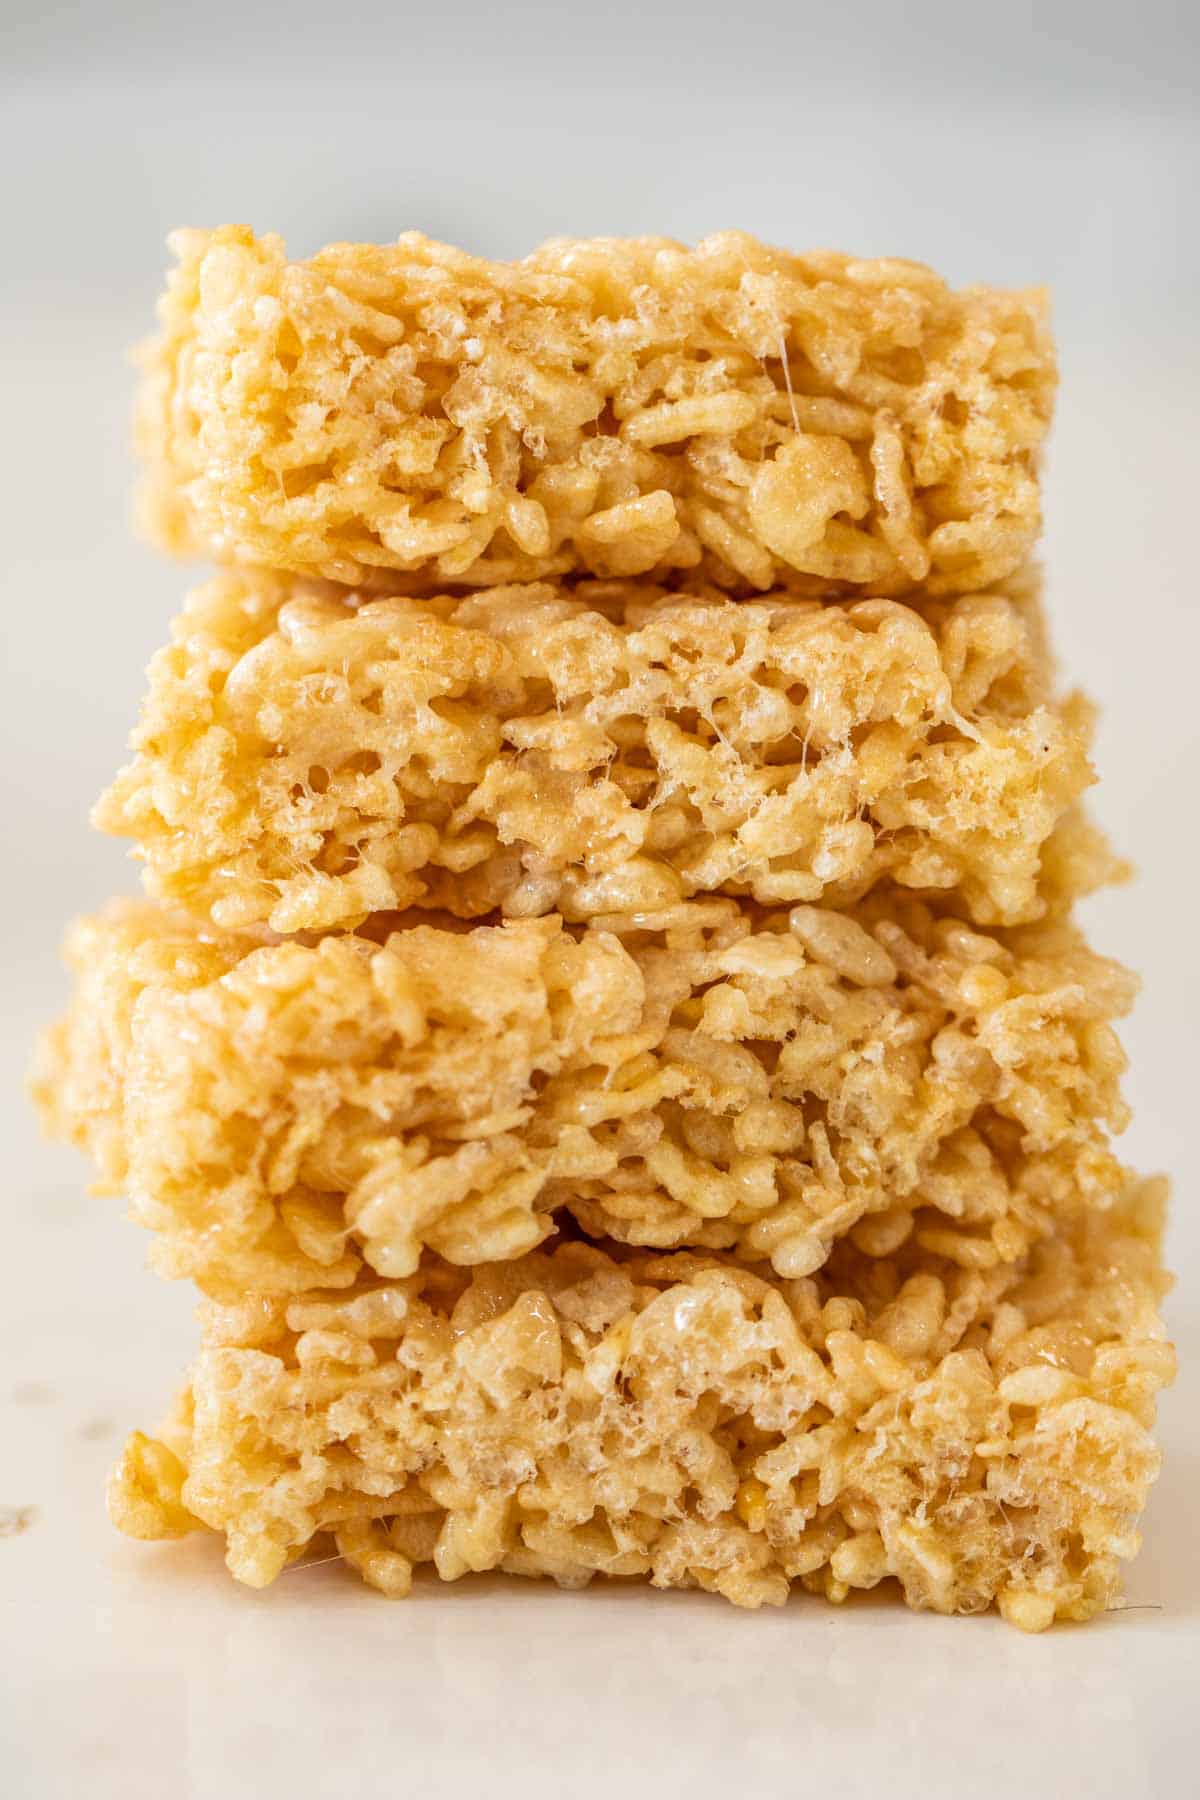 Rice krispie treat slices stacked on top of each other.